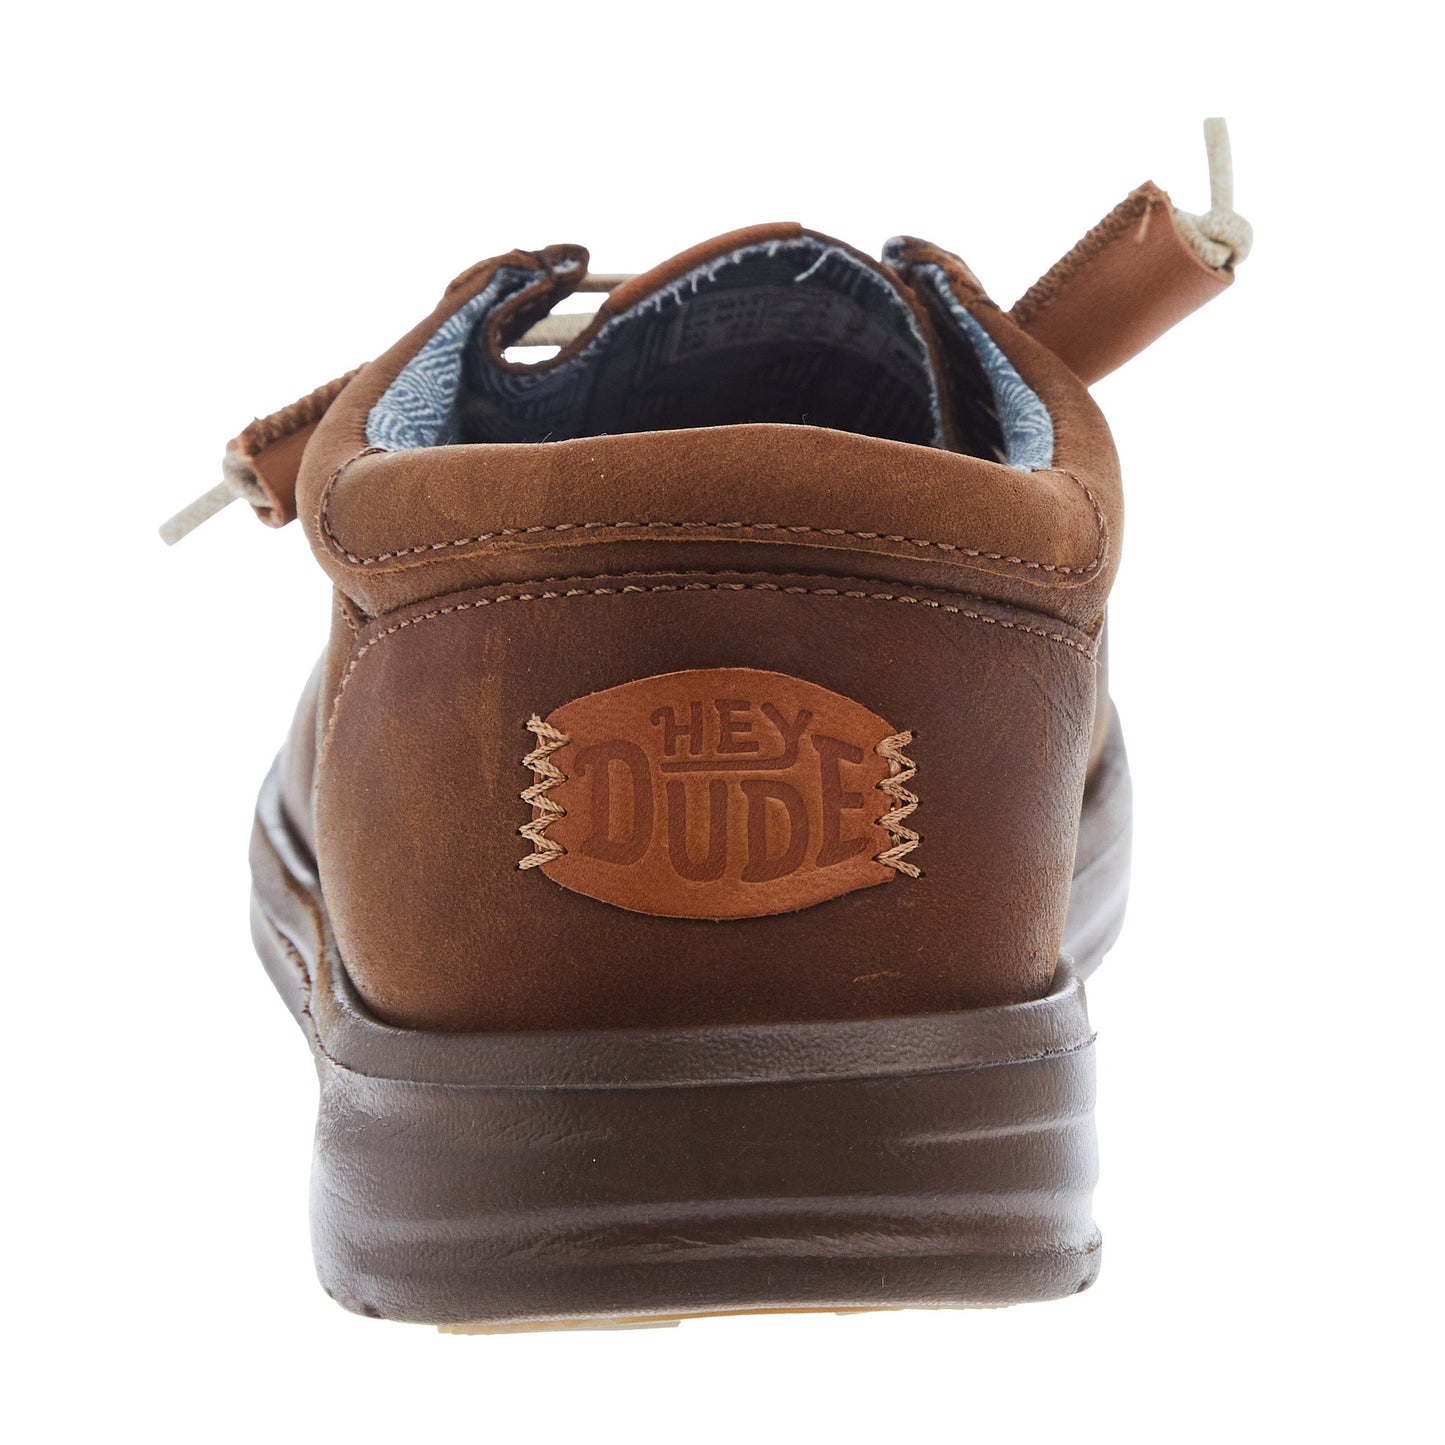 Wally Grip Craft Leather in Brown by Hey Dude Shoes